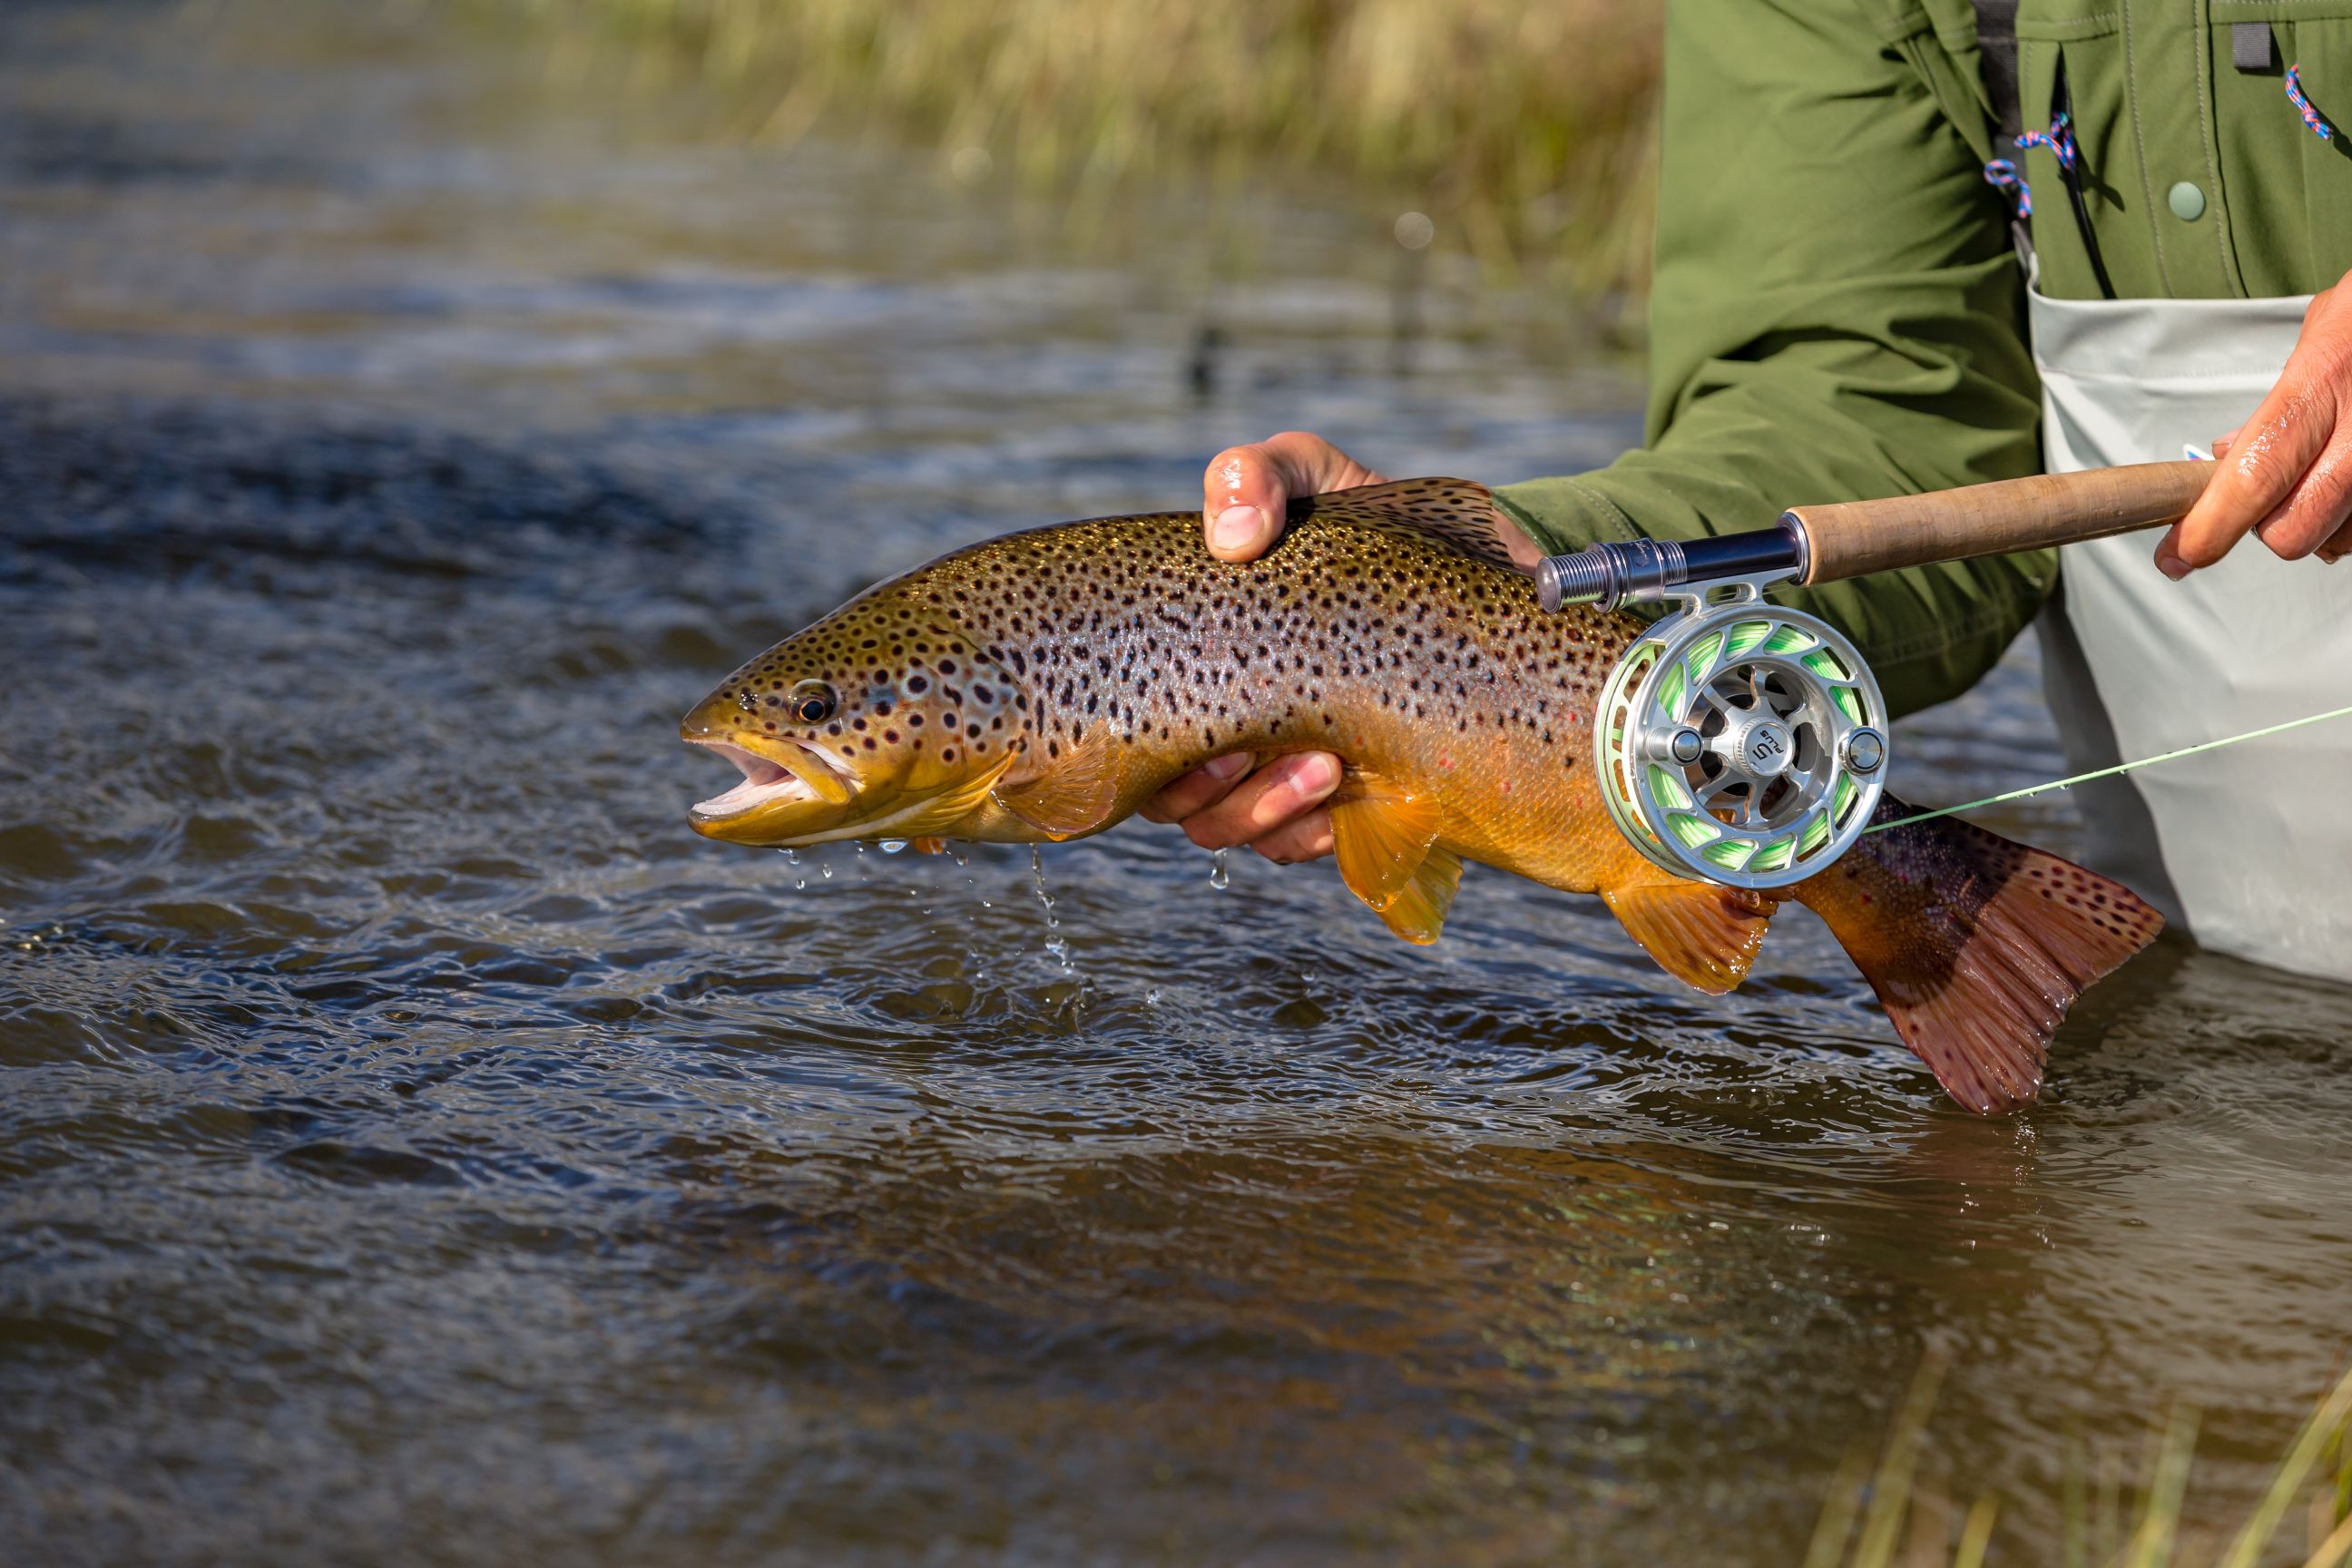 Media - Patagonia River Guides - Argentina Fly Fishing